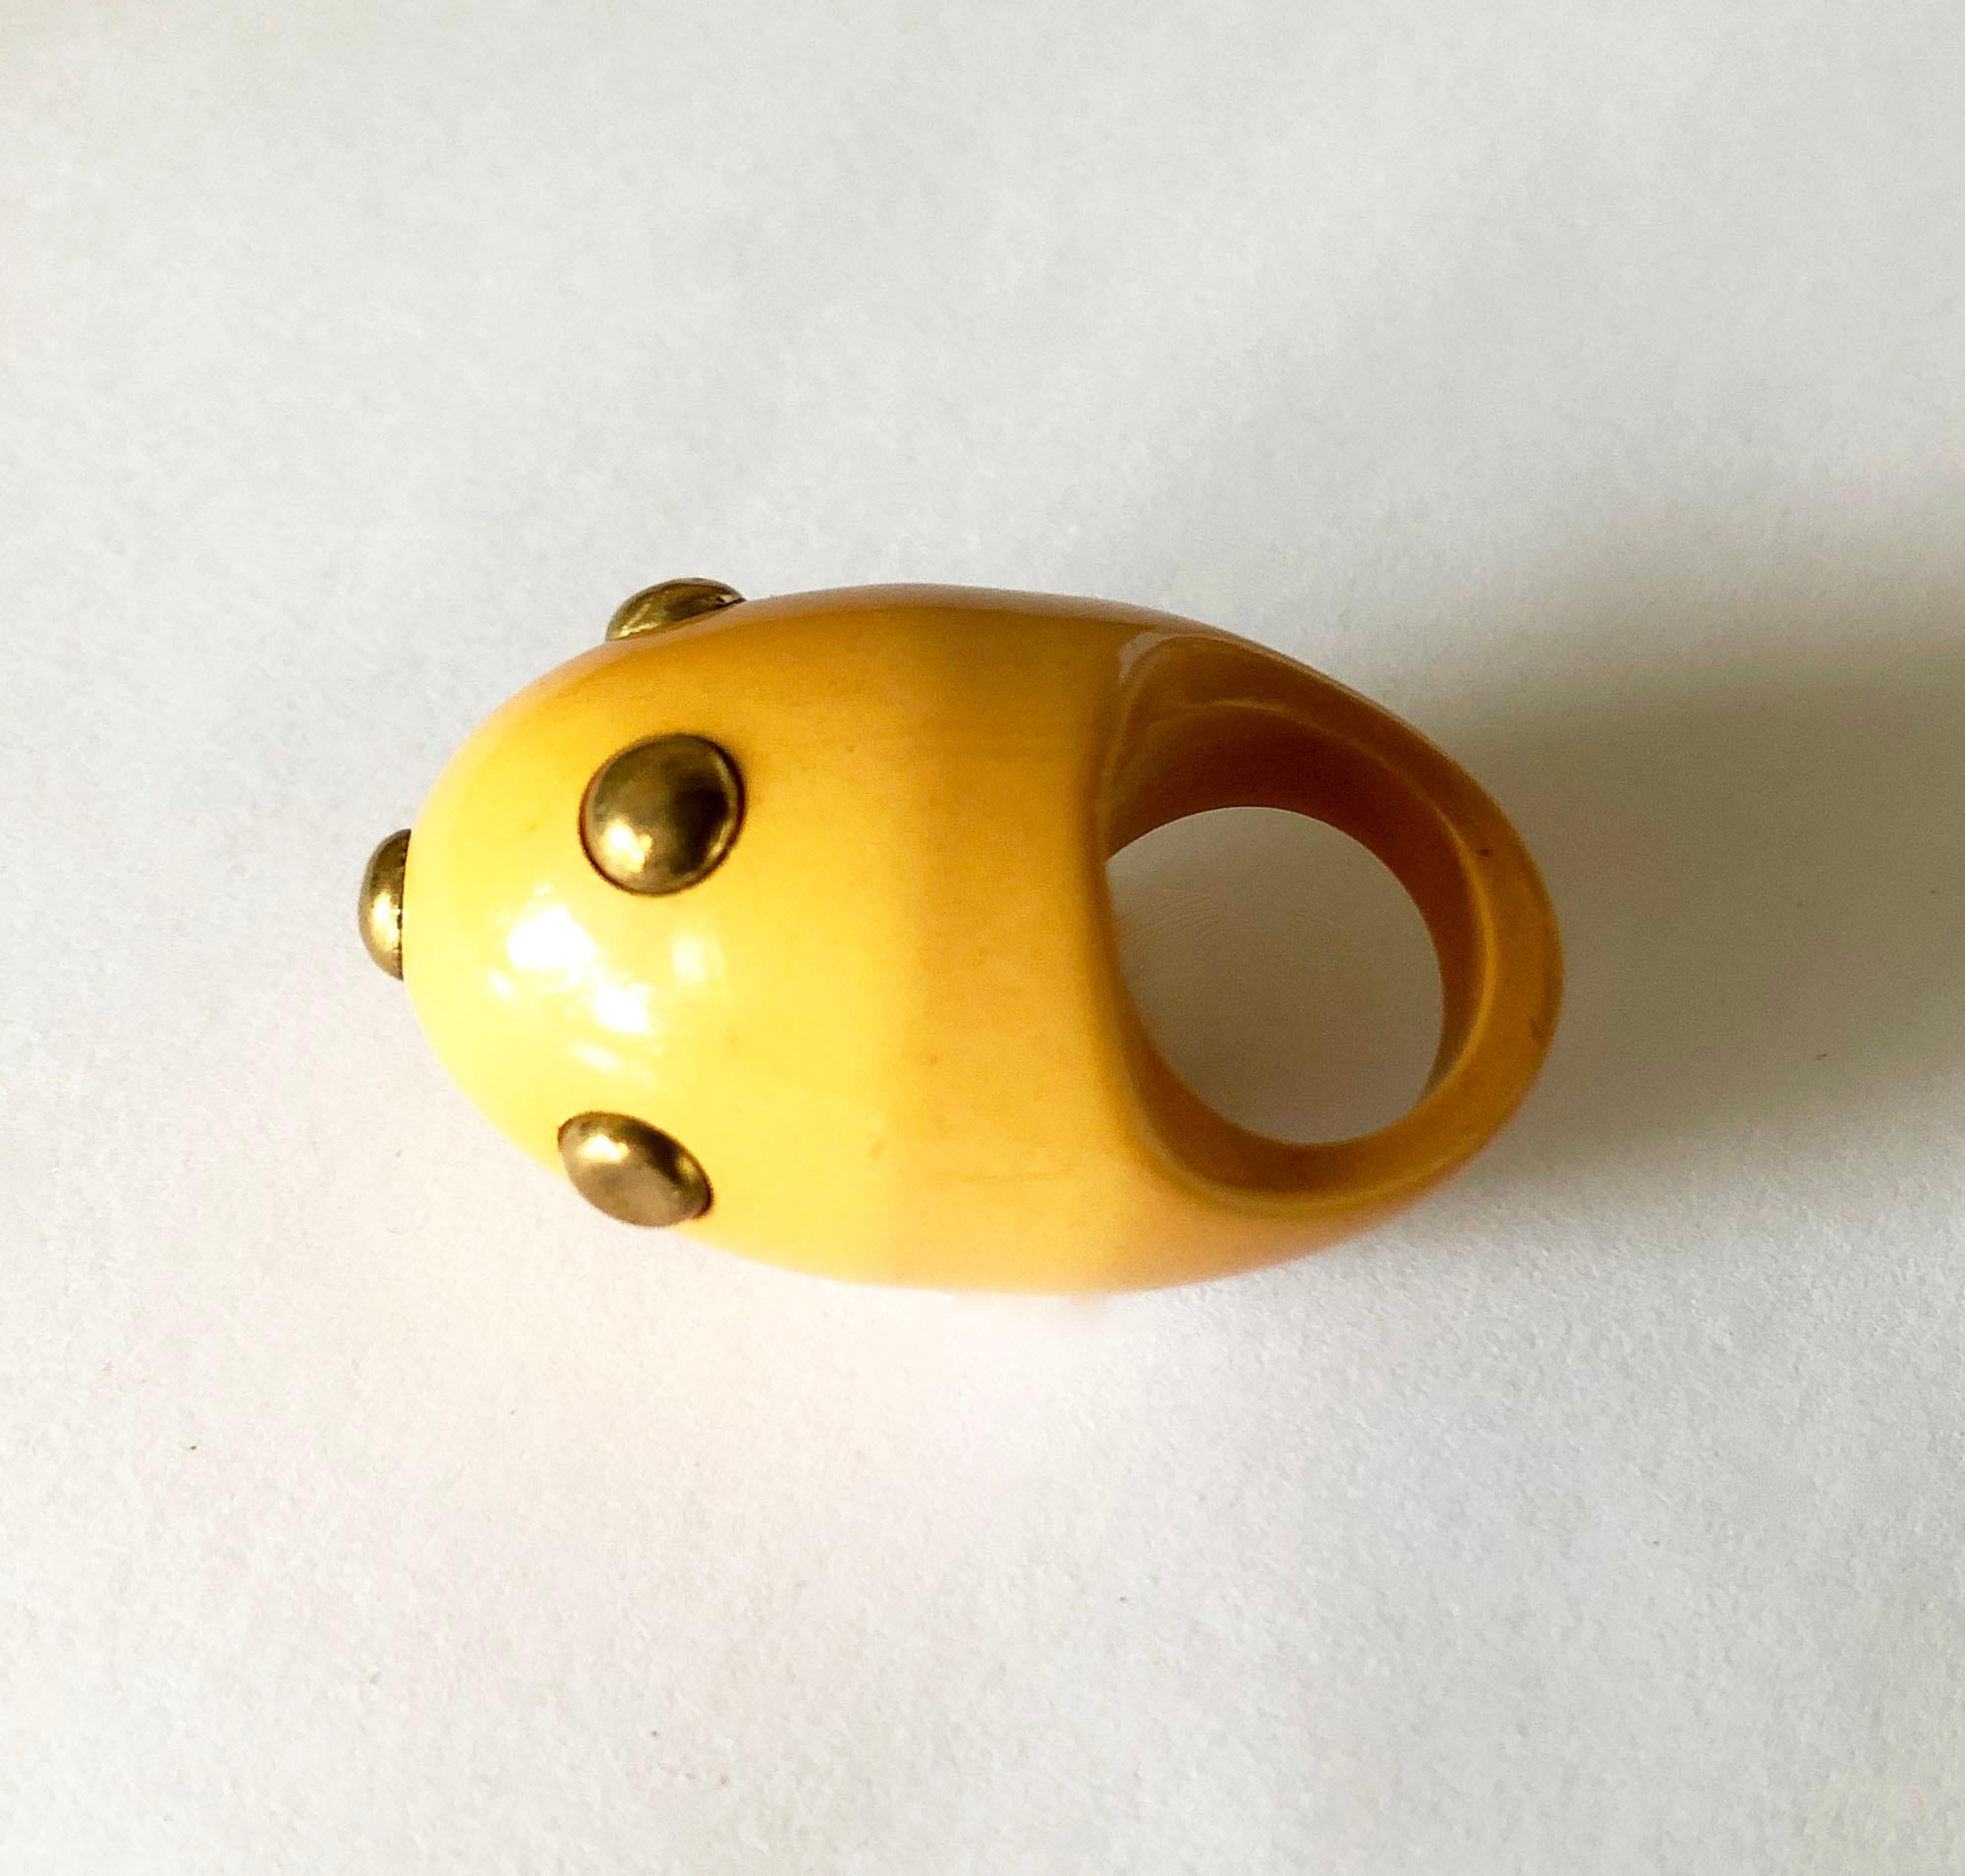 Rare vintage 1960's bakelite ring with brass studs made by Kenneth Jay Lane, New York.  Ring is a finger size 6.5 and is unsigned. Very good vintage condition with one dent on one stud.  I purchased this and another two that I have listed in NYC in